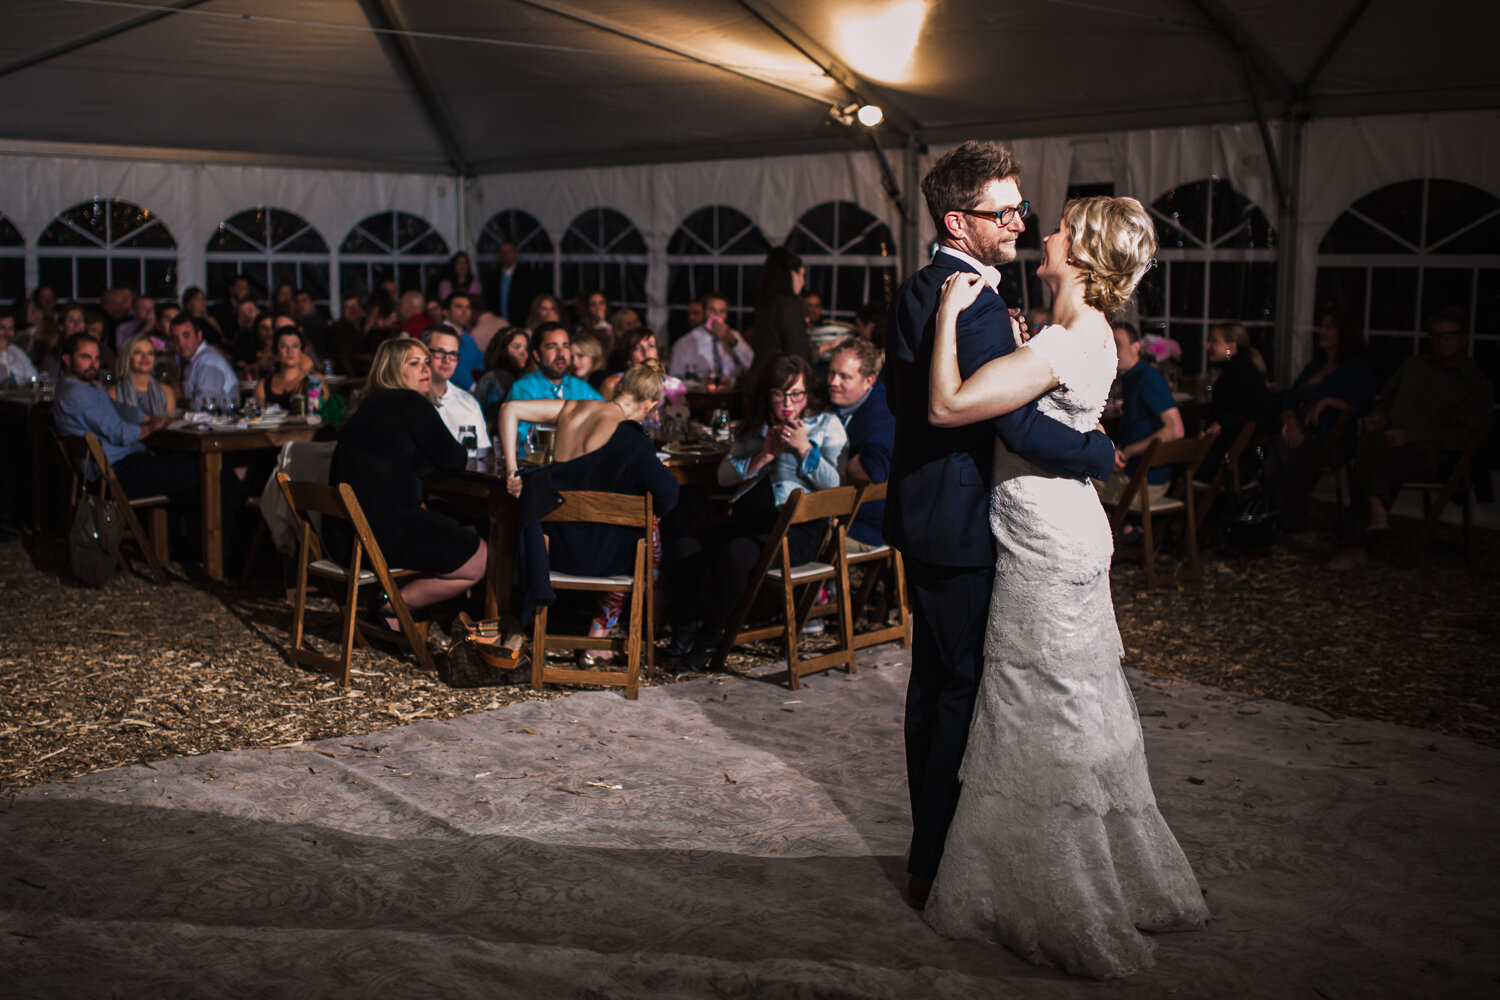  First dance at Nederland &nbsp;Colorado wedding by JMGant Photography.&nbsp; 